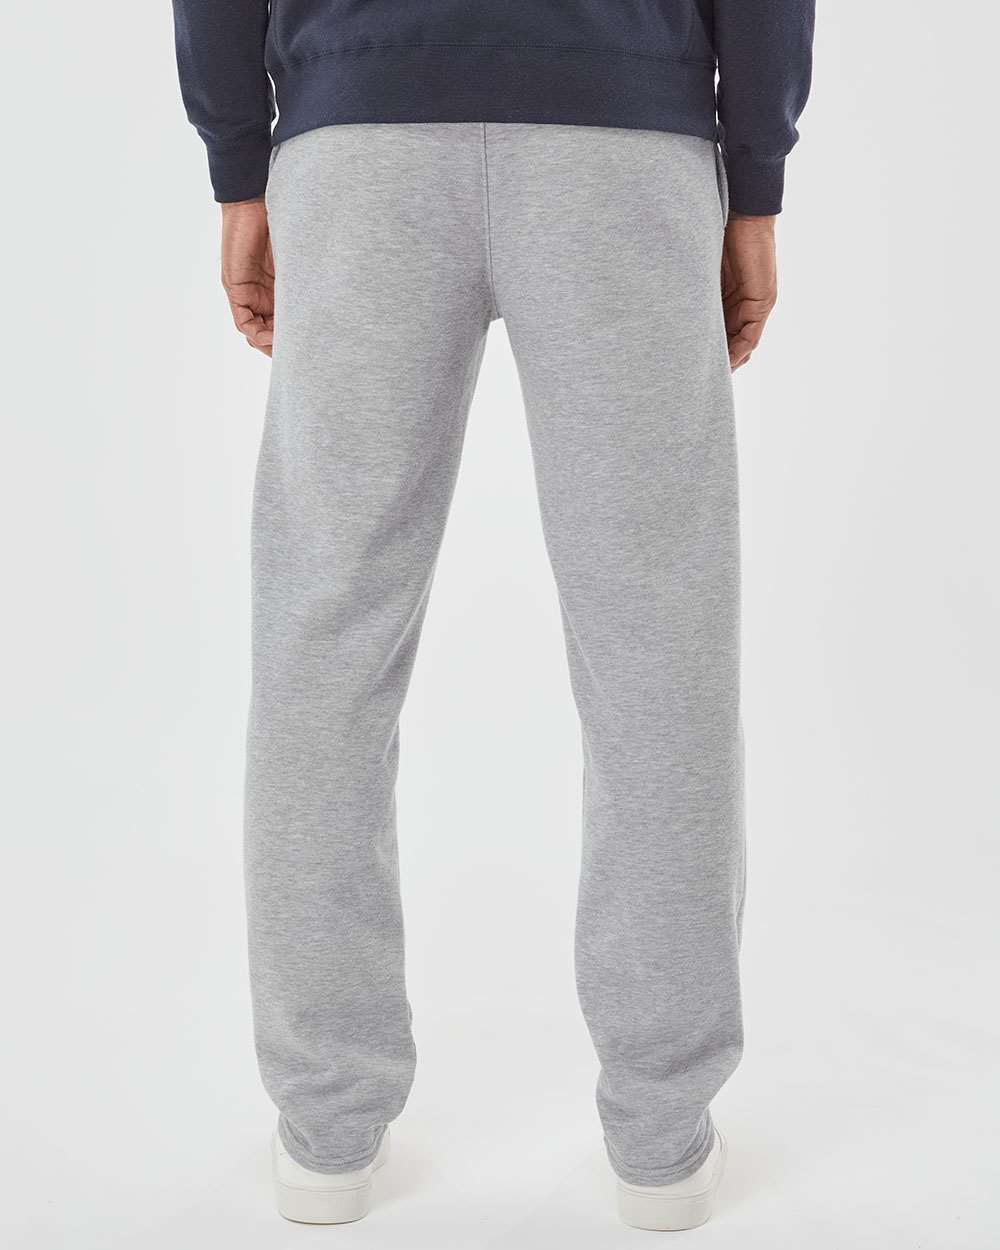 Russell Athletic Cotton Rich Open Bottom Sweatpants for Men 